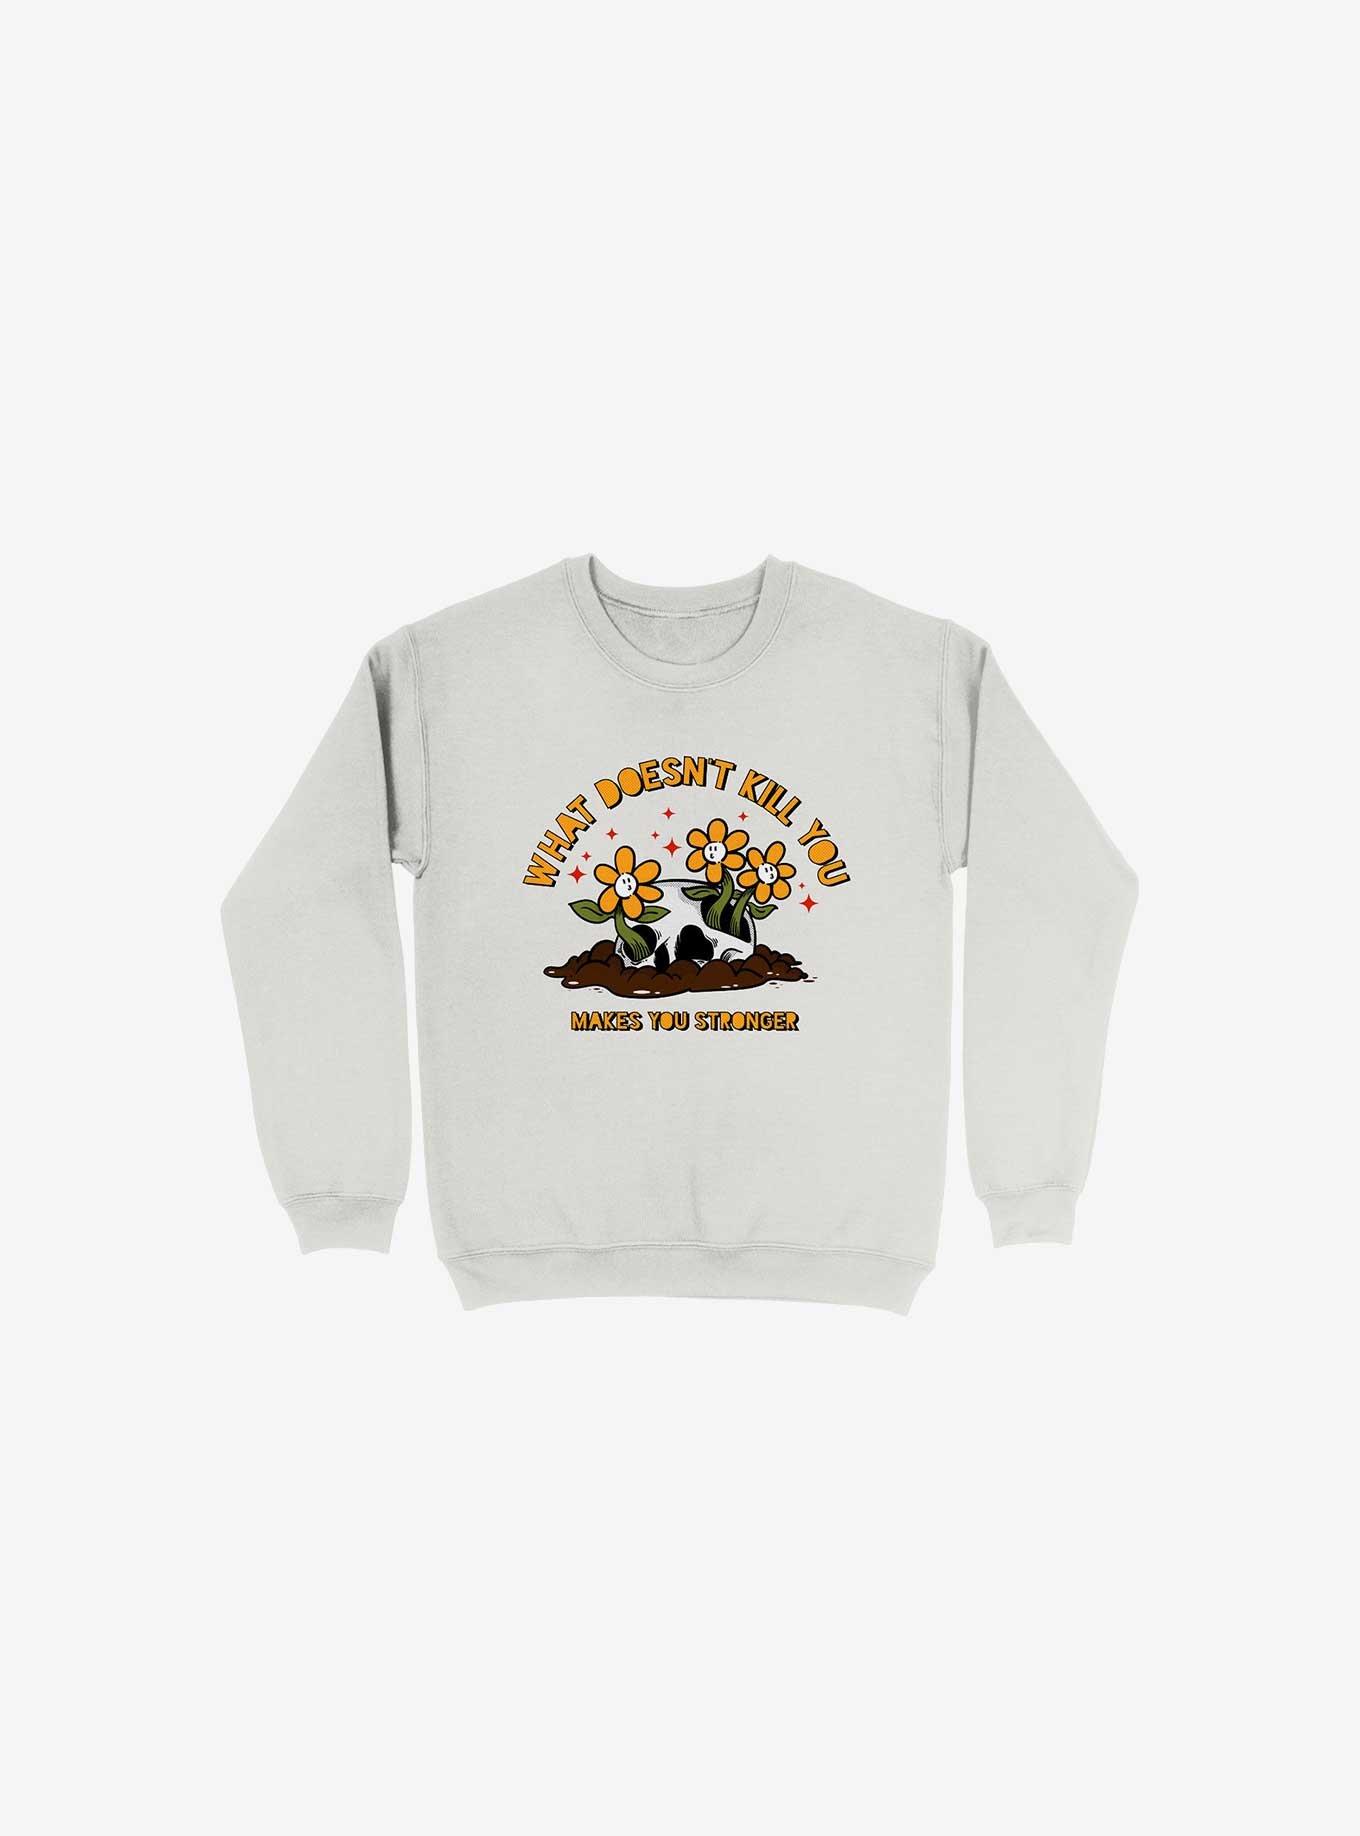 What Doesn't Kill You Makes You Stronger Sweatshirt, WHITE, hi-res